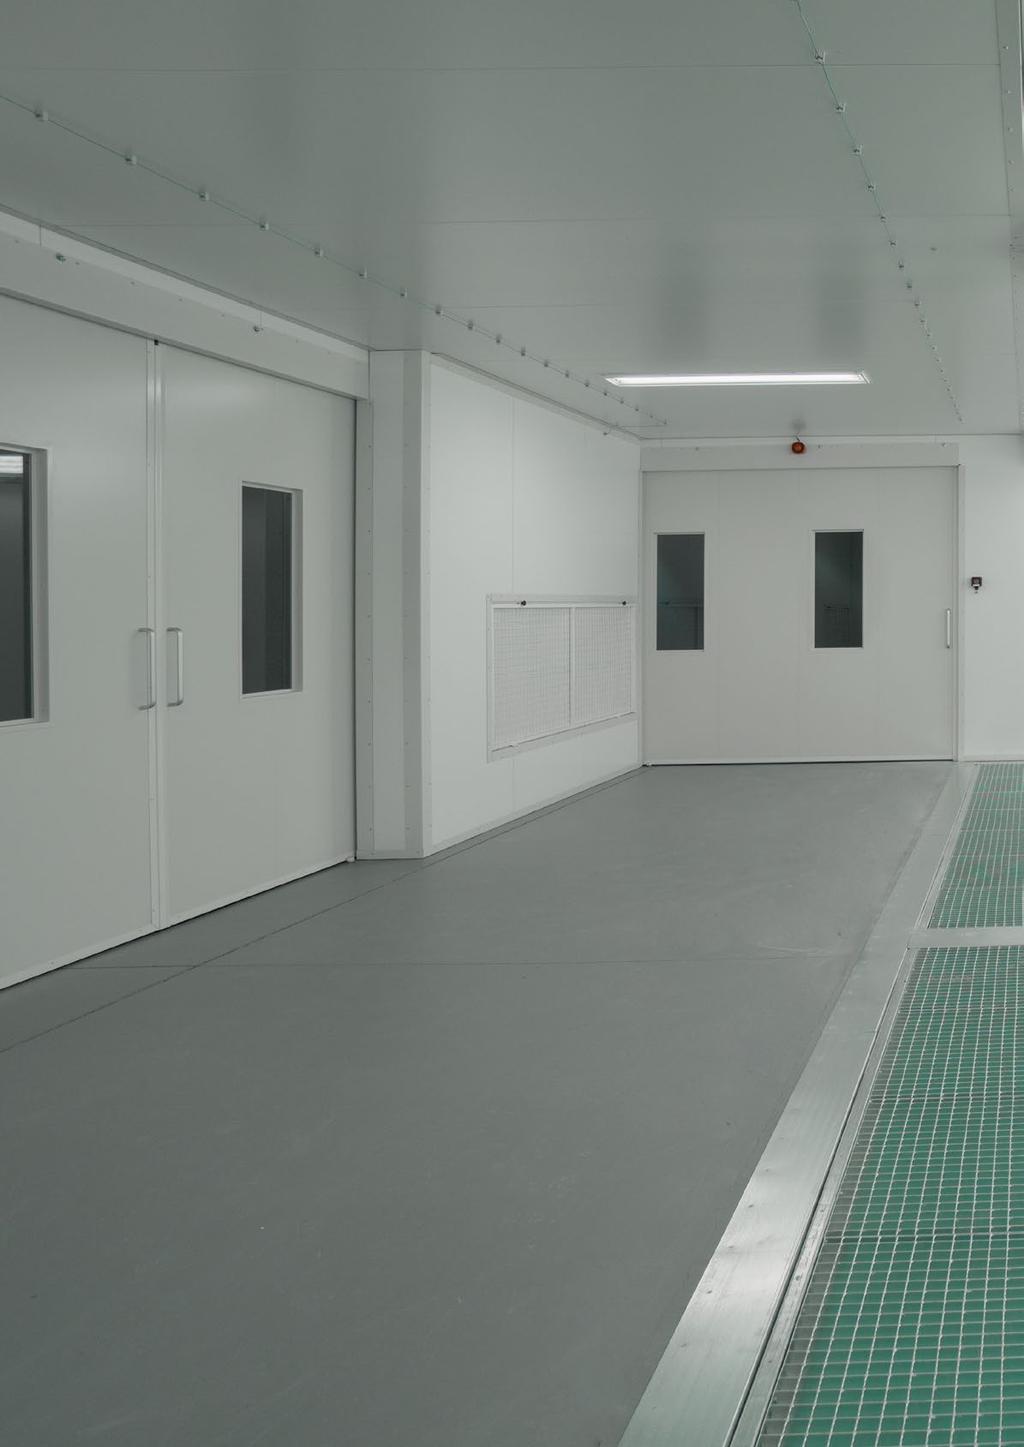 Paint mist extraction systems and paint booths from Höcker Polytechnik GmbH Dazzling results. The quality of your products surface is your business card.